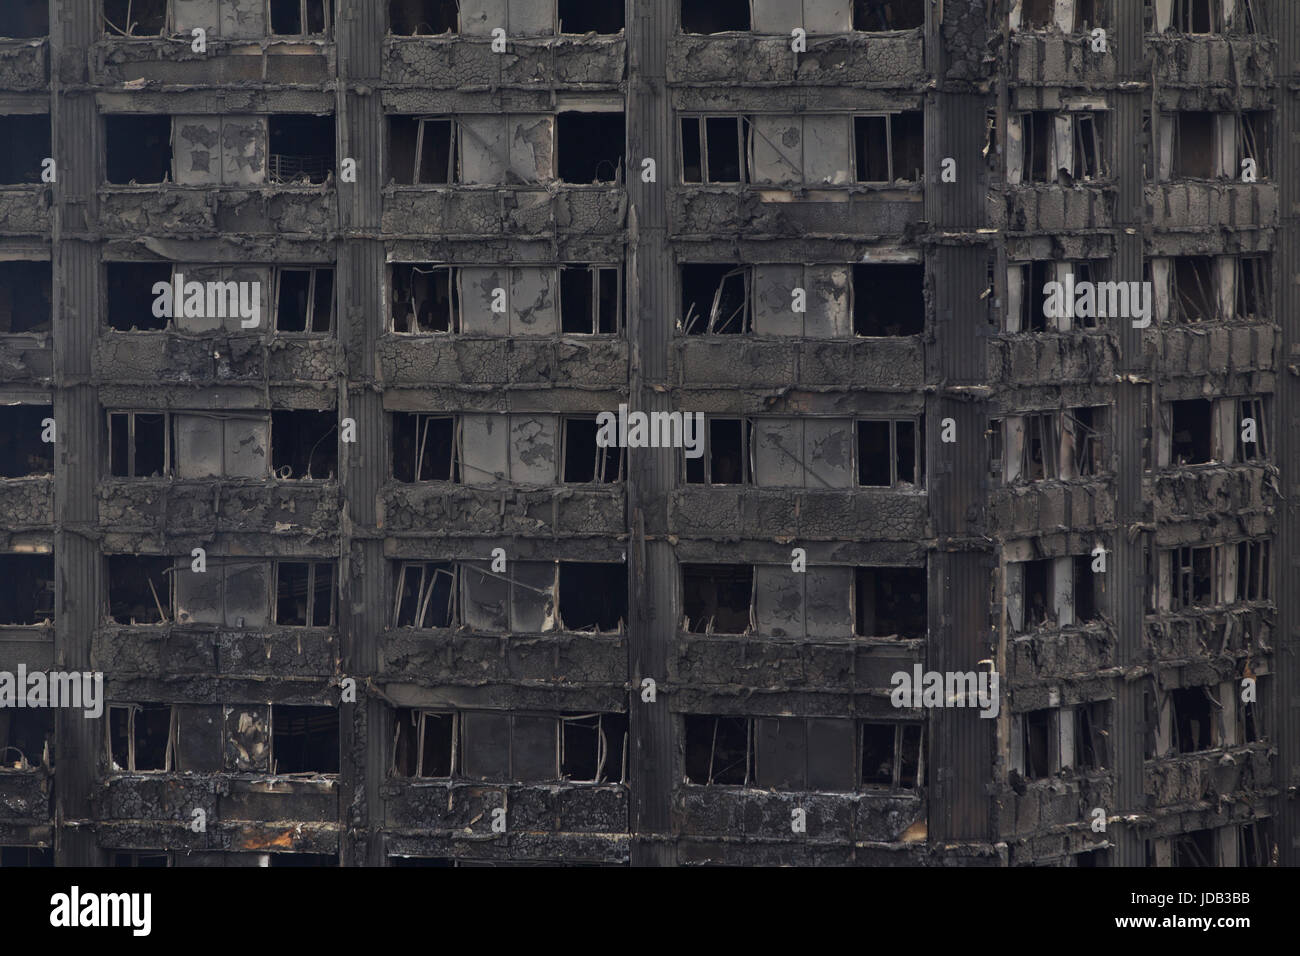 Grenfell Tower, the 27-storey tower block which was engulfed in a huge fire in west London, England, UK Stock Photo